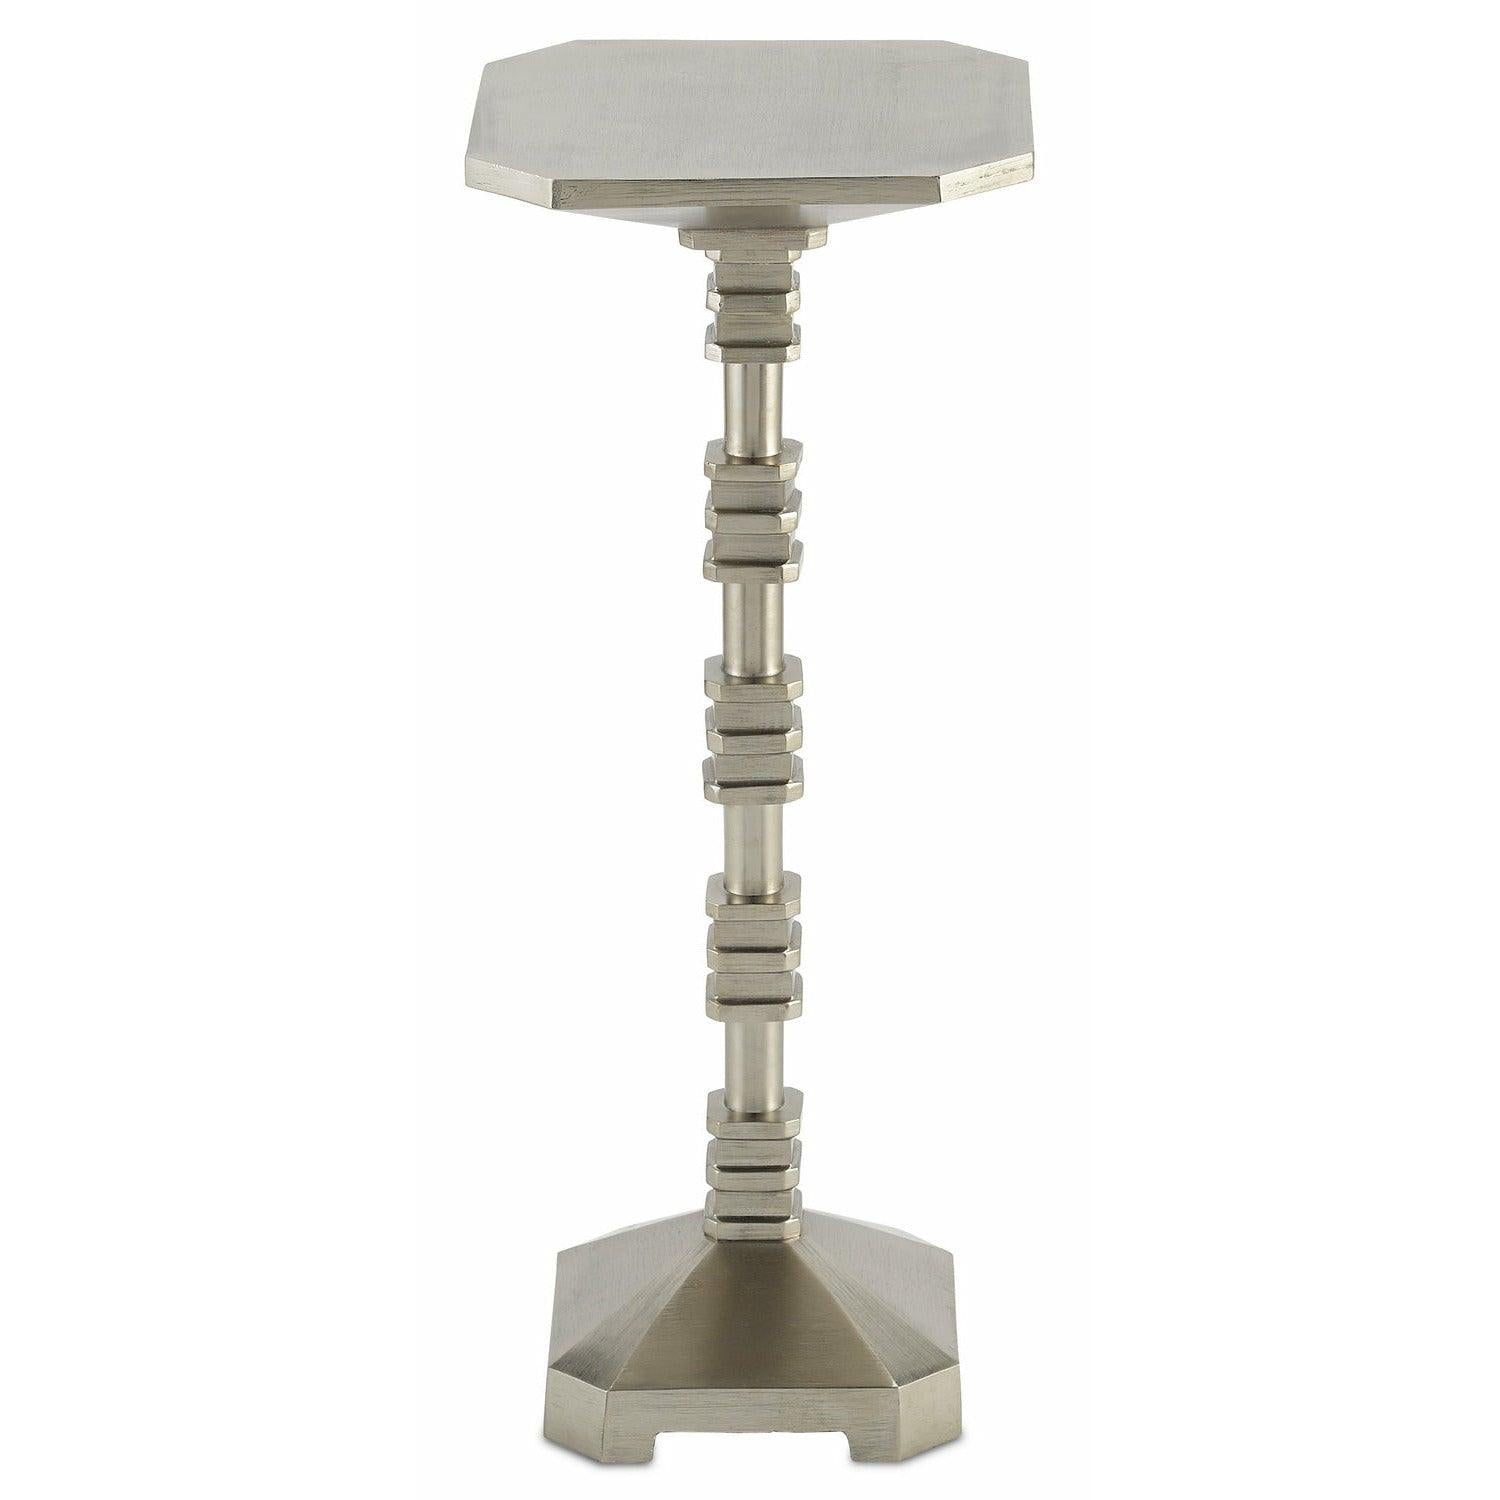 Currey and Company - Pilare Drinks Table - 4000-0106 | Montreal Lighting & Hardware